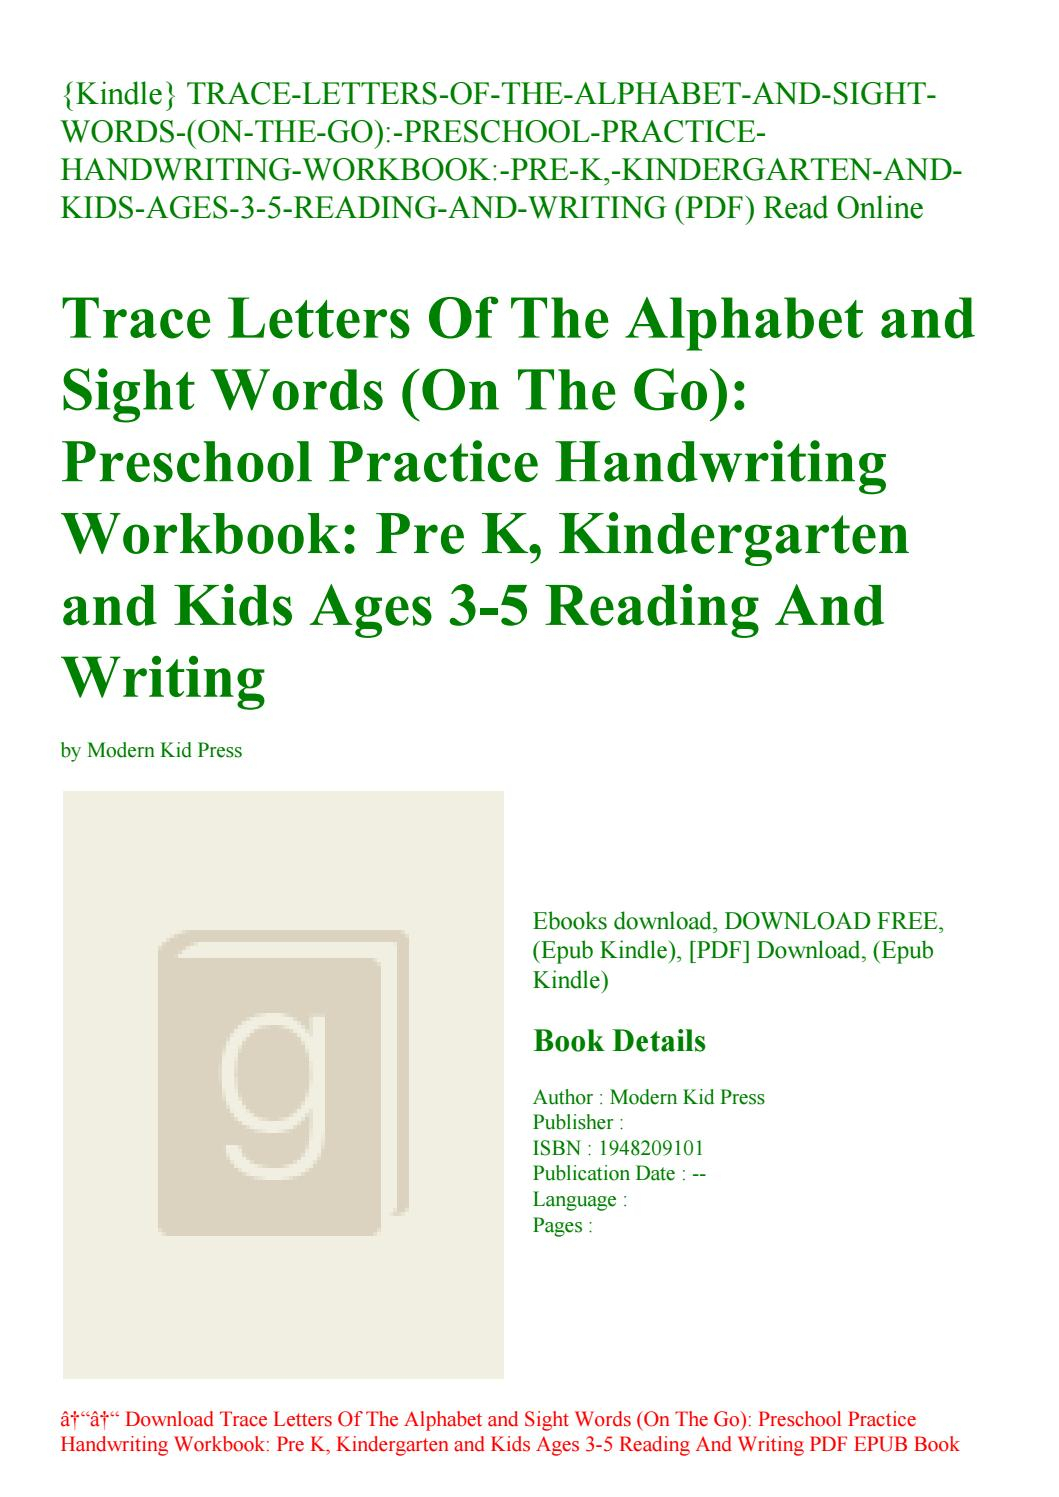 Kindle} Trace-Letters-Of-The-Alphabet-And-Sight-Words-(On pertaining to Free Online Tracing Letters